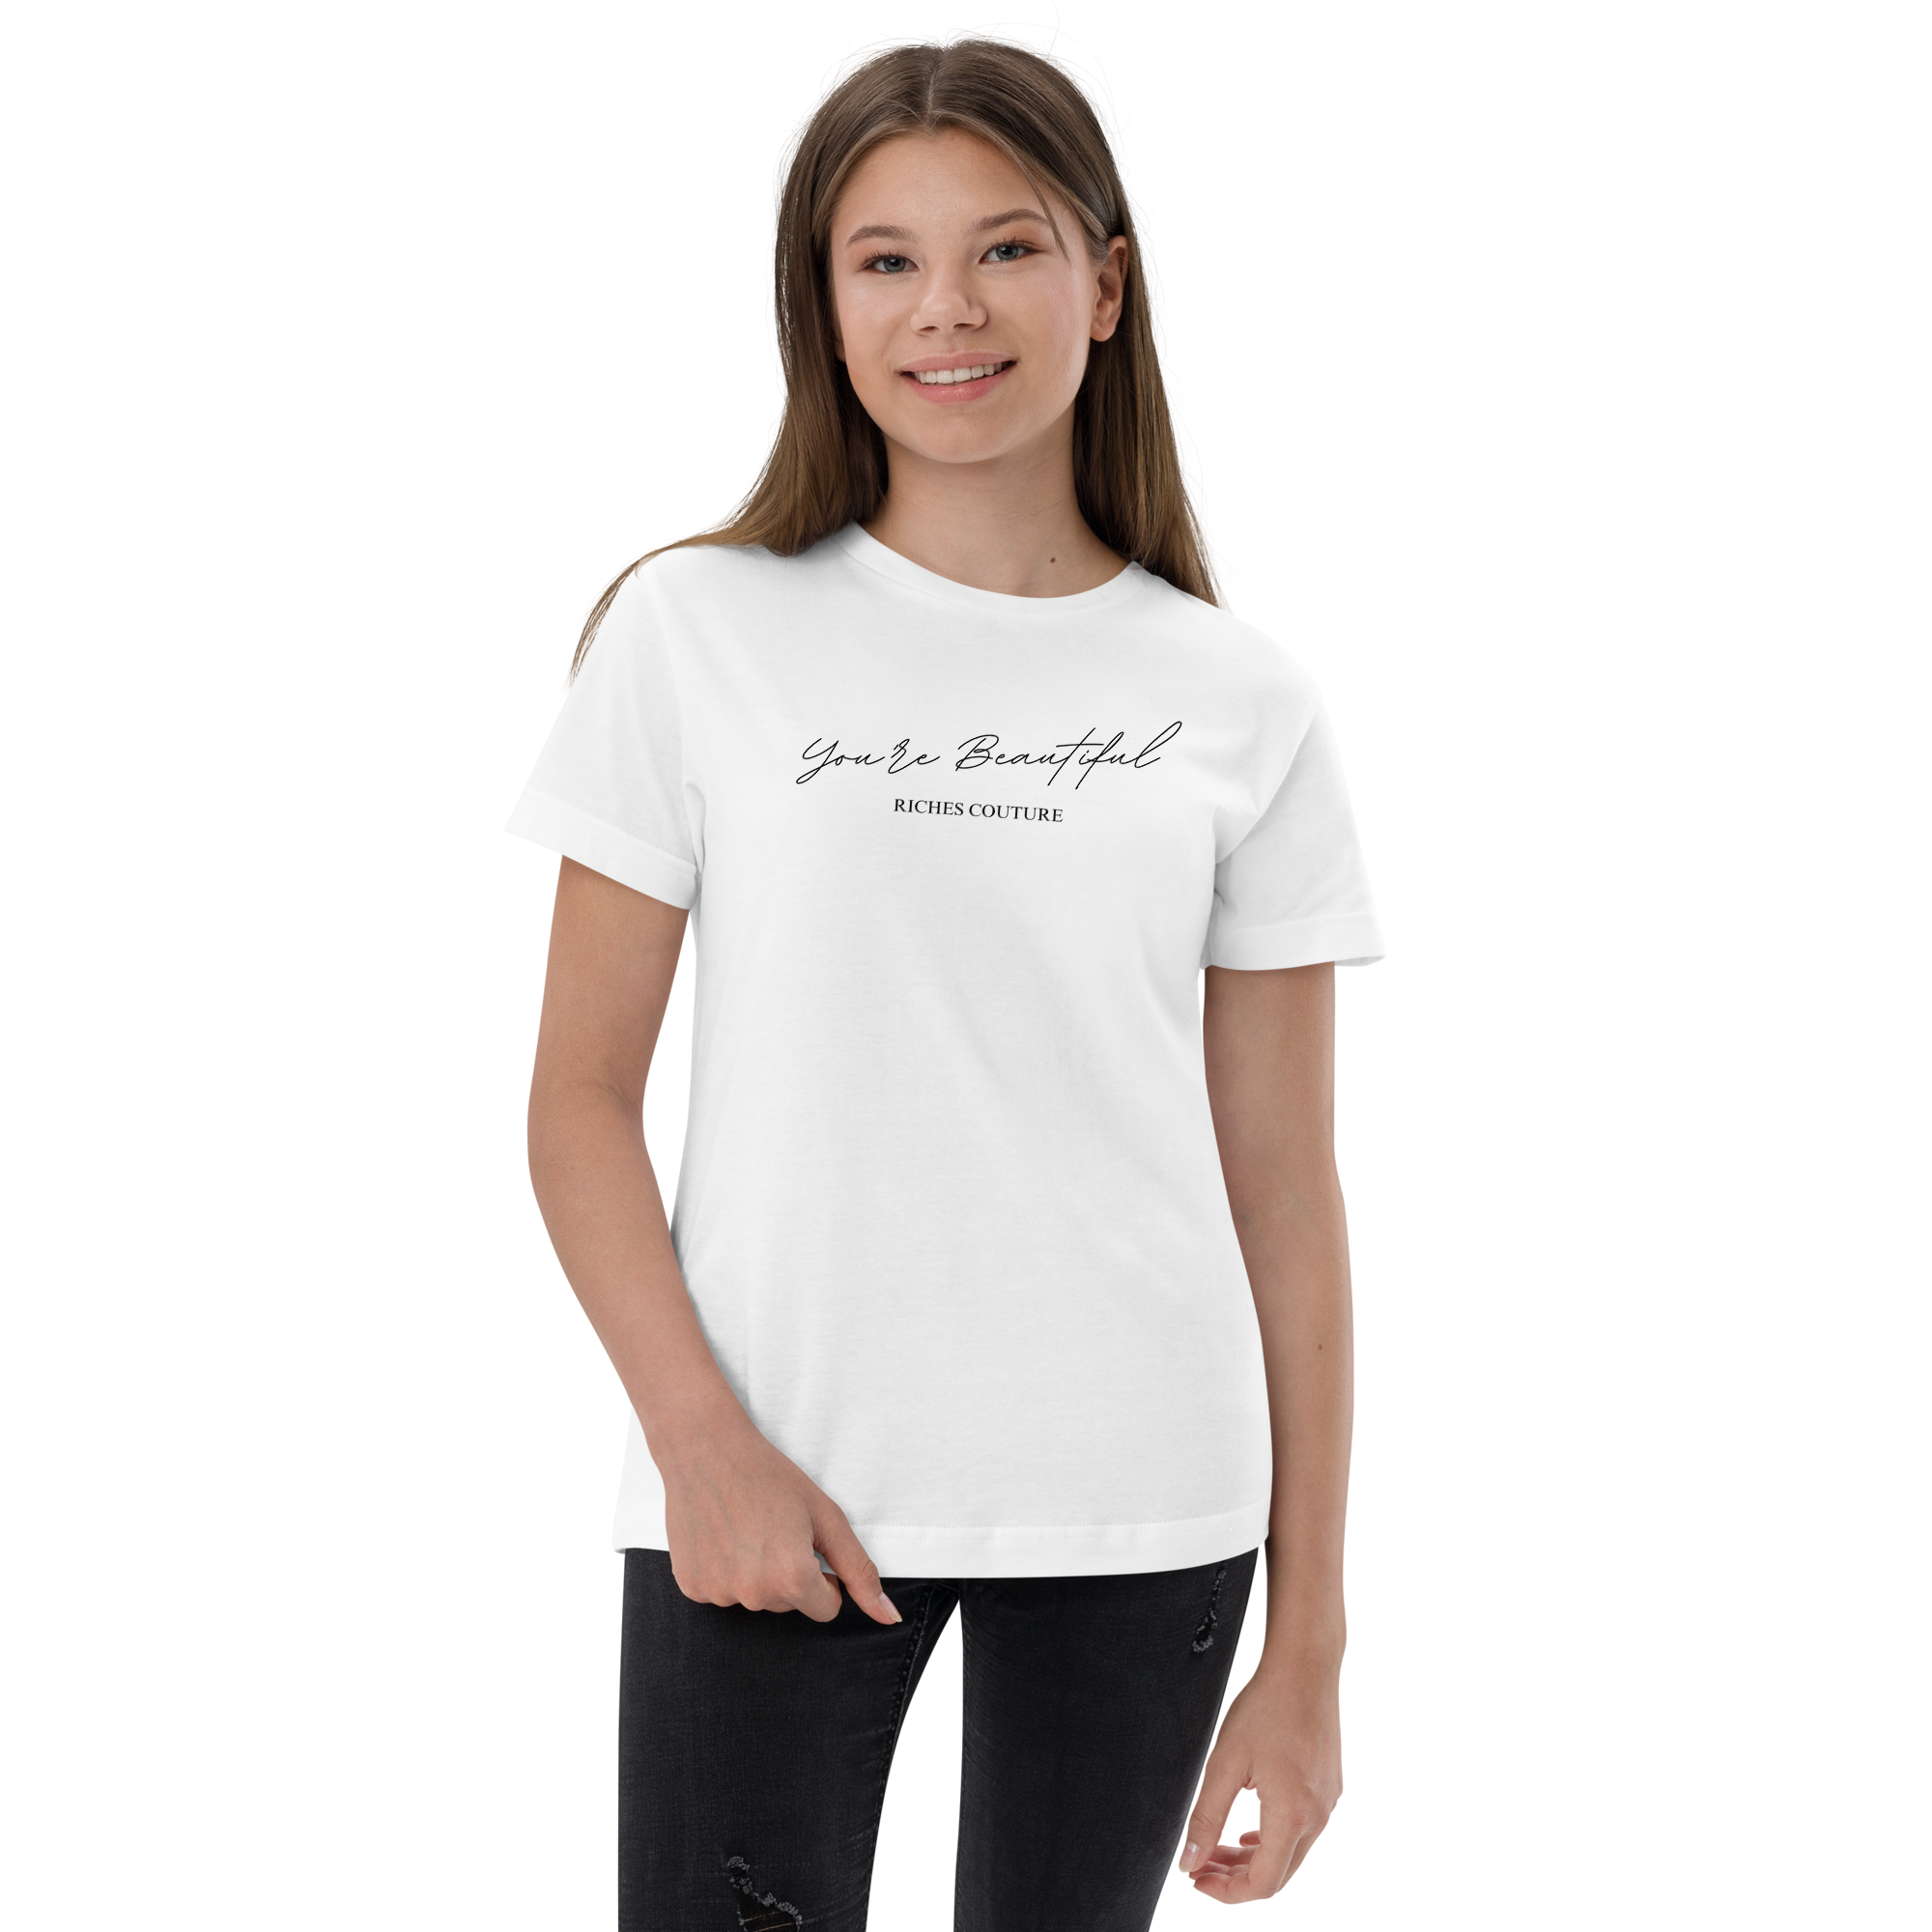 Riches Couture classic youth jersey t-shirt is soft and comfy white